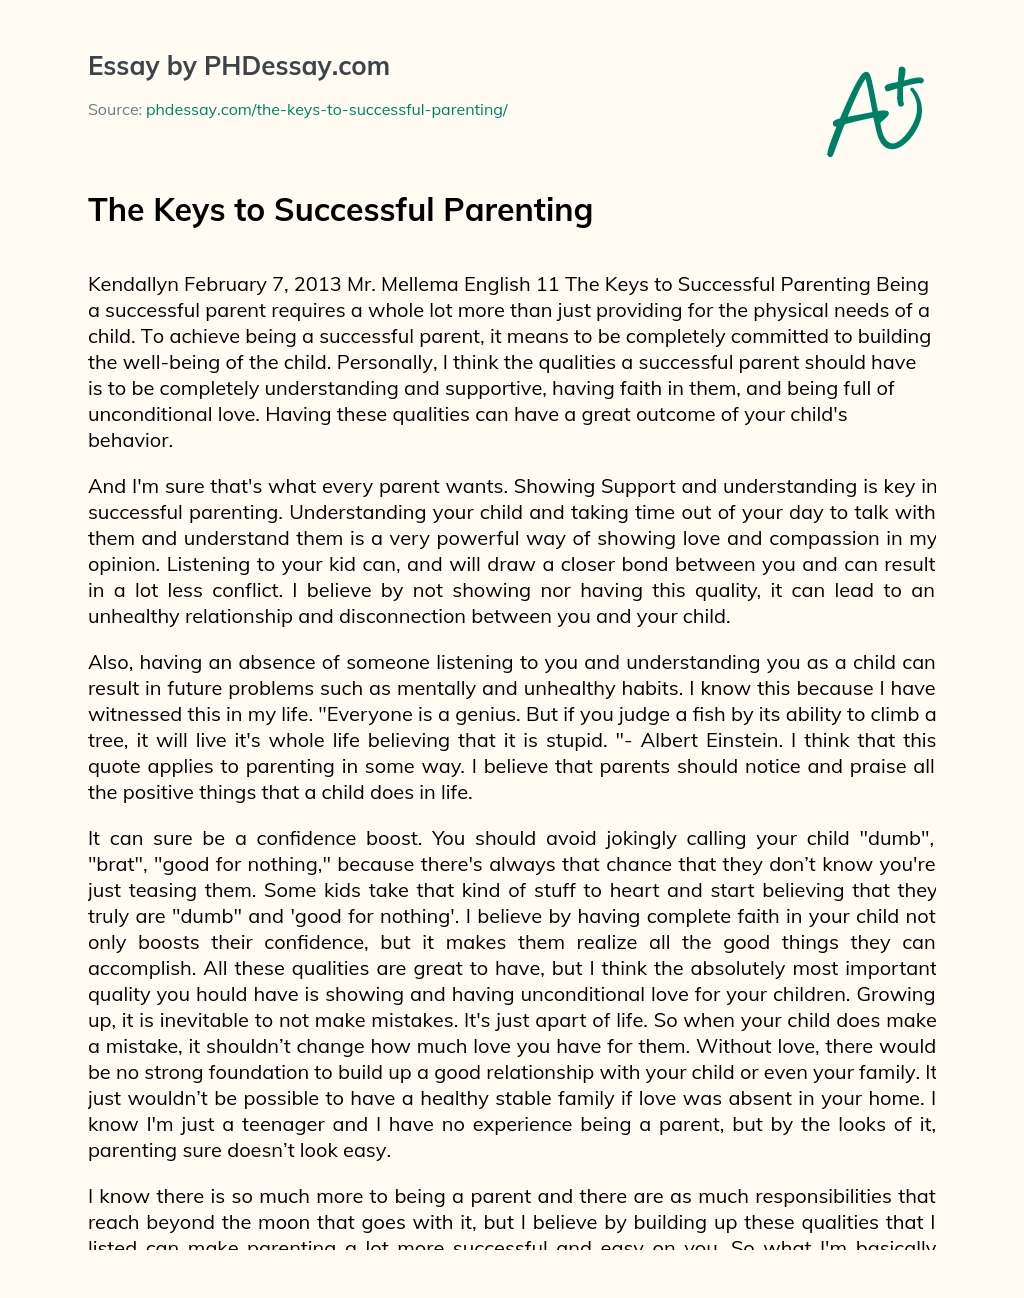 The Keys to Successful Parenting essay